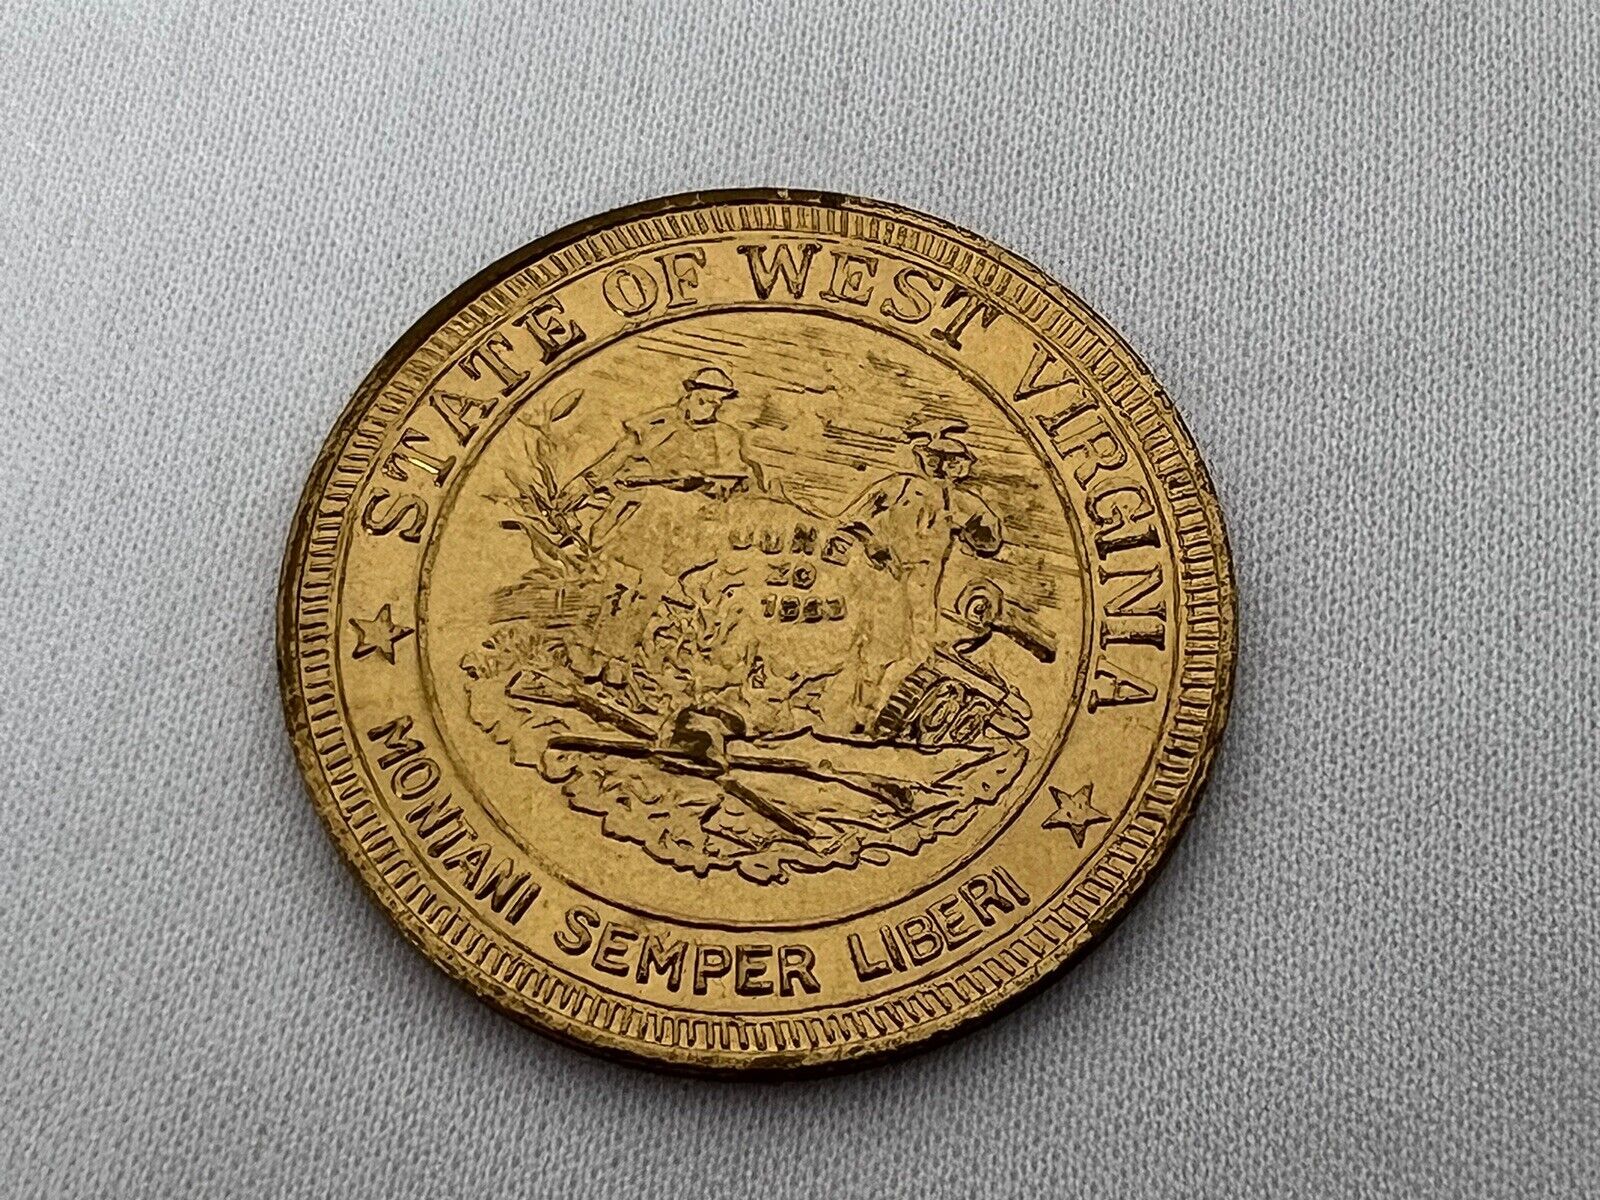 State Of West Virginia 1965 Hulett C Smith Governor Coin 27th Governor